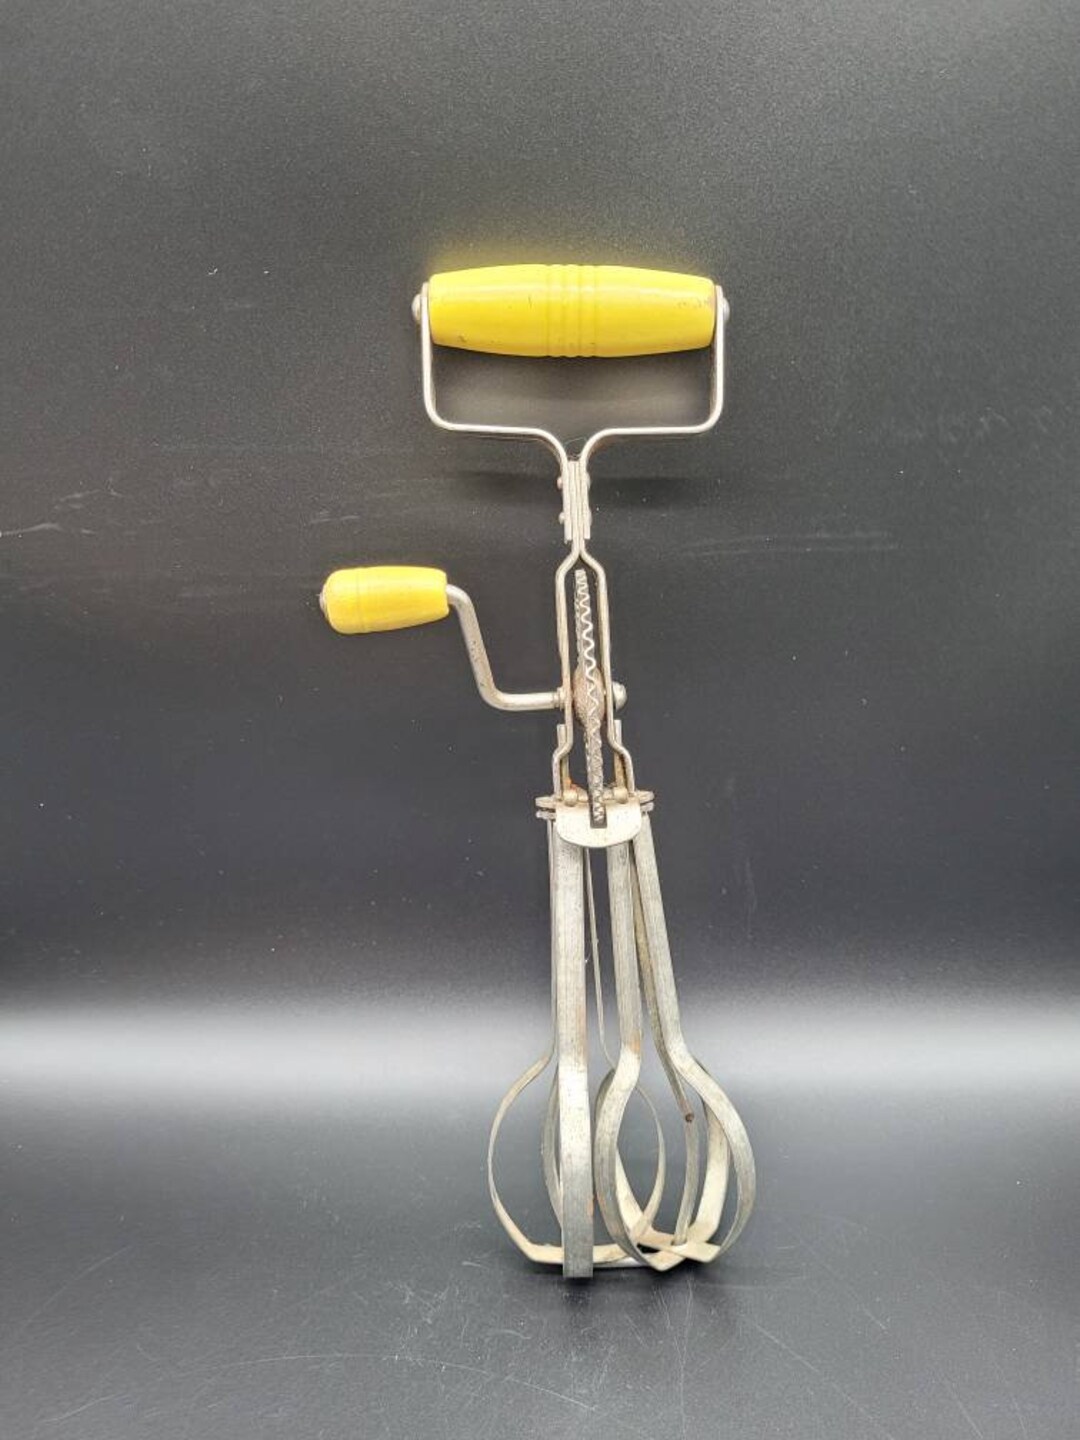 Vintage Taplin Rotary Egg Beater - Vintage Kitchen Tools - Stainless S